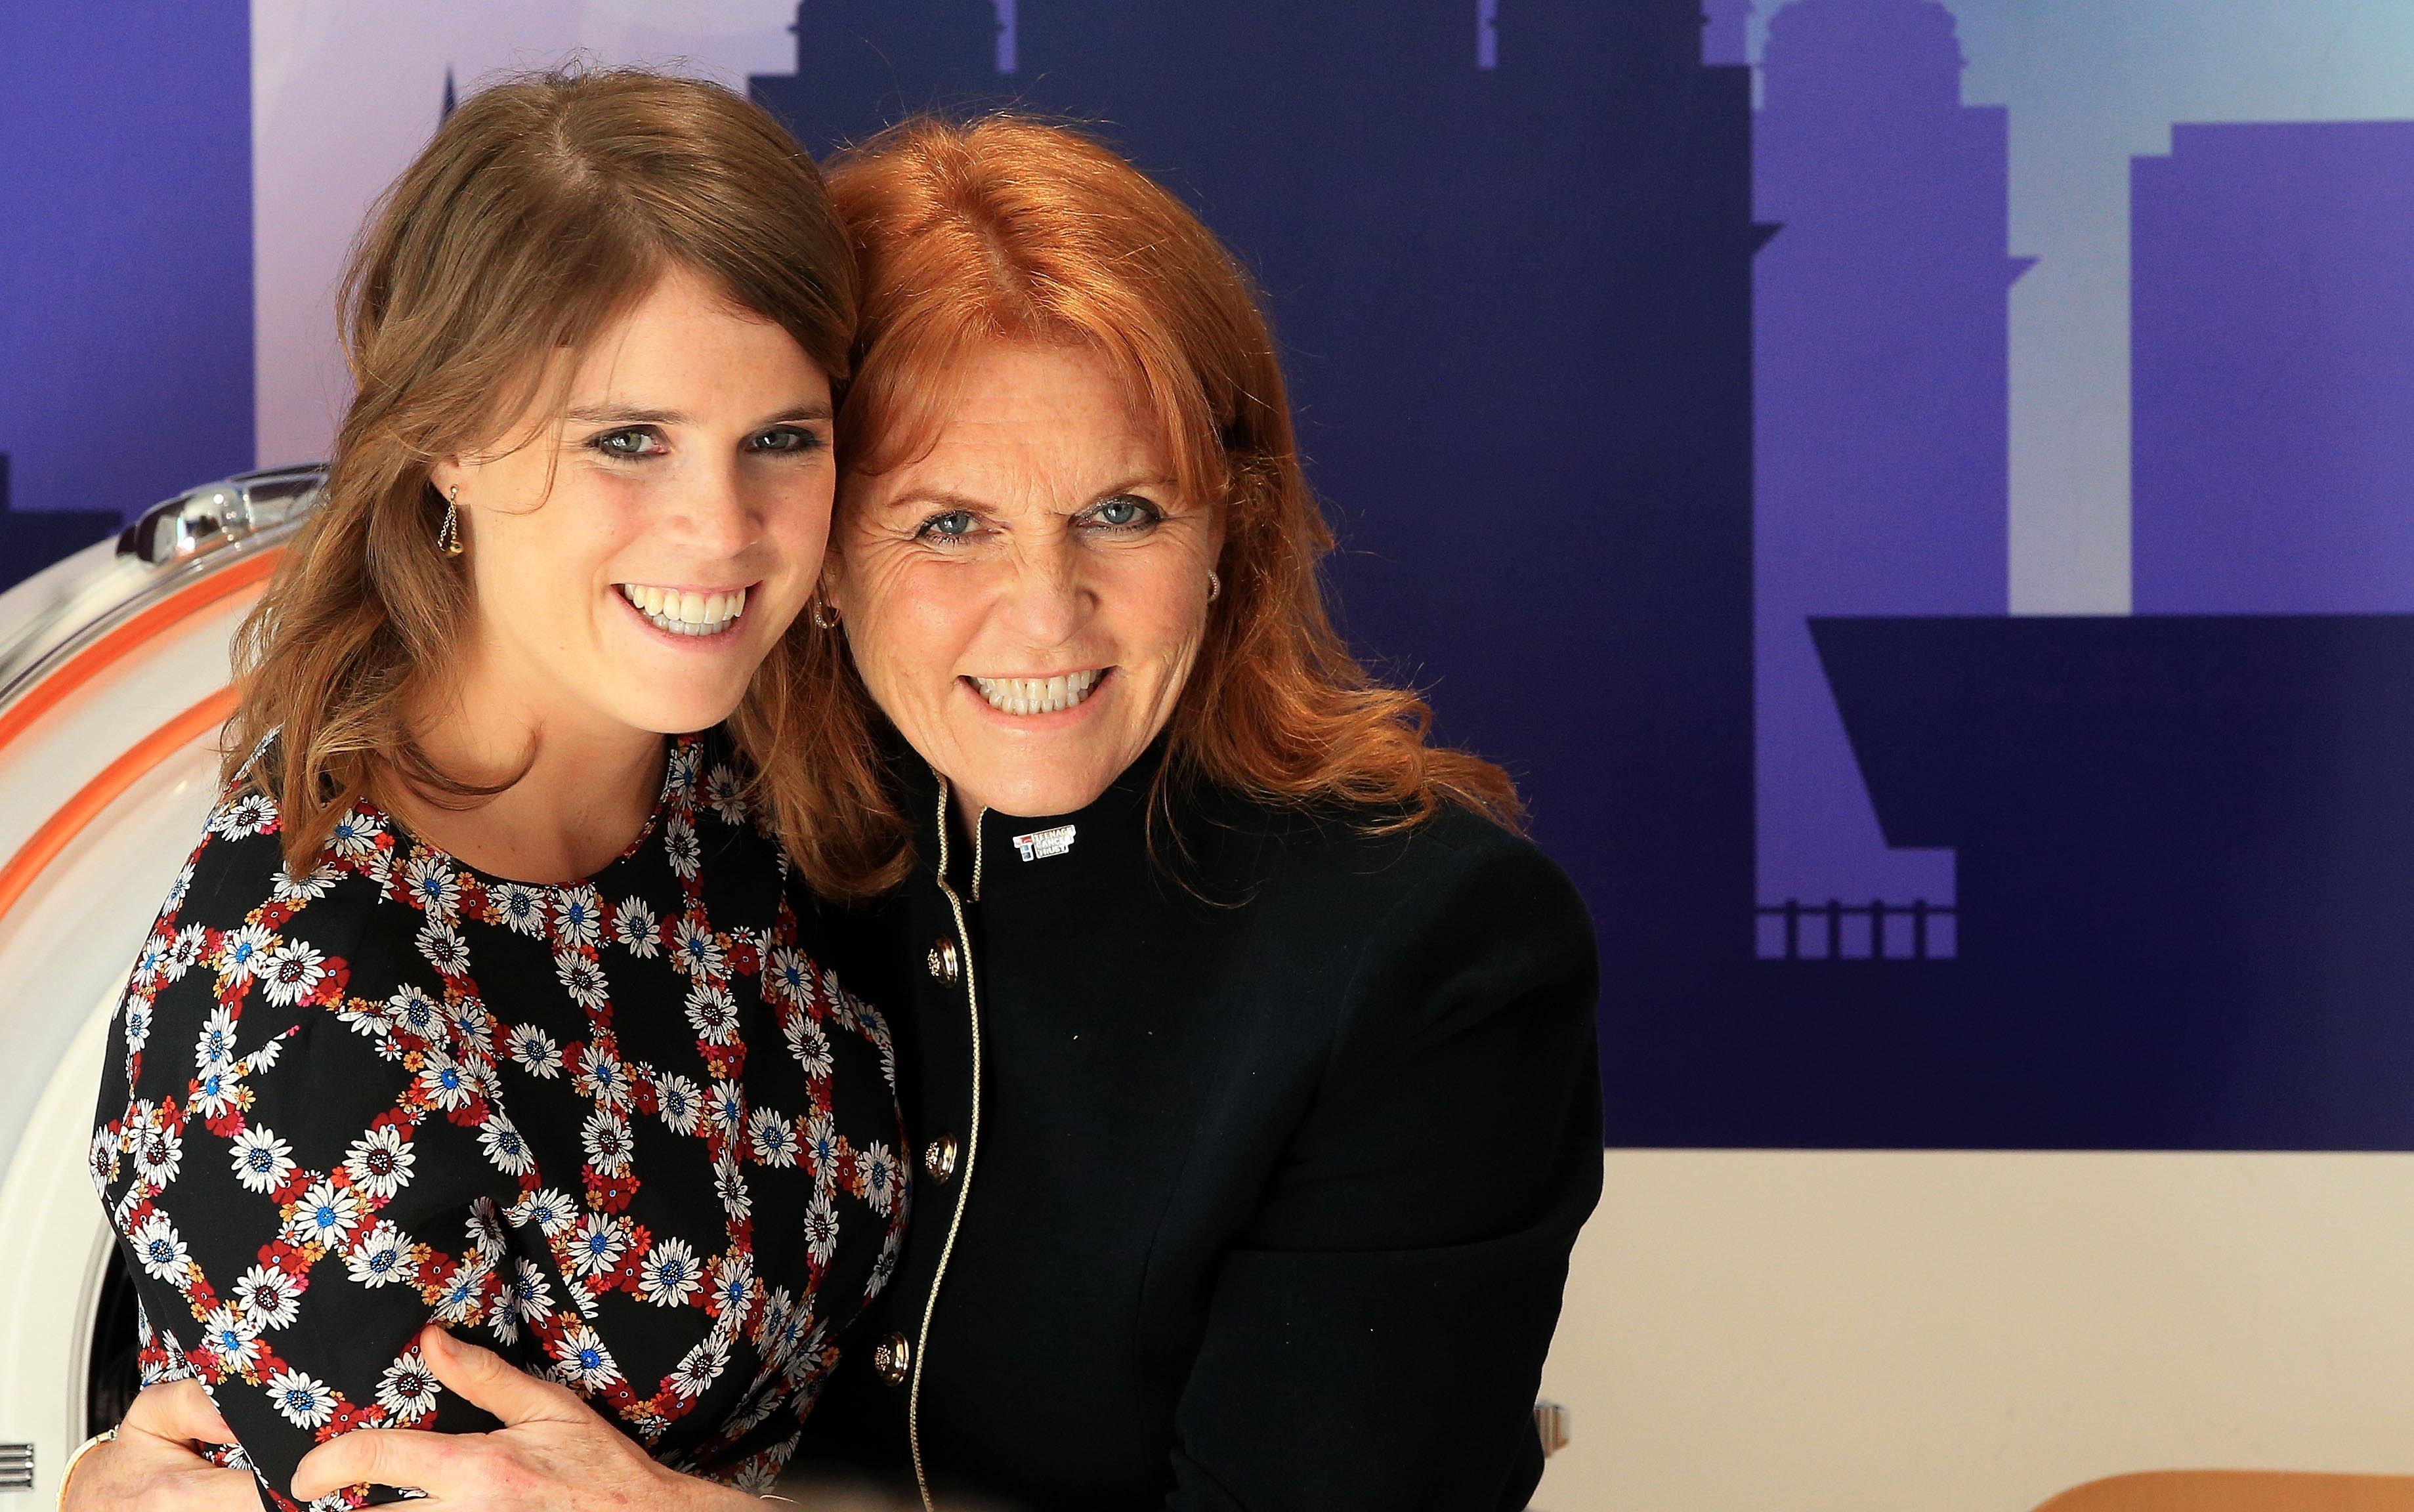 Sarah Ferguson and Princess Eugenie share a hug during a visit to the Teenage Cancer Trust ward at Alder Hey Hospital in Liverpool in September 2017. | Source: Getty Images